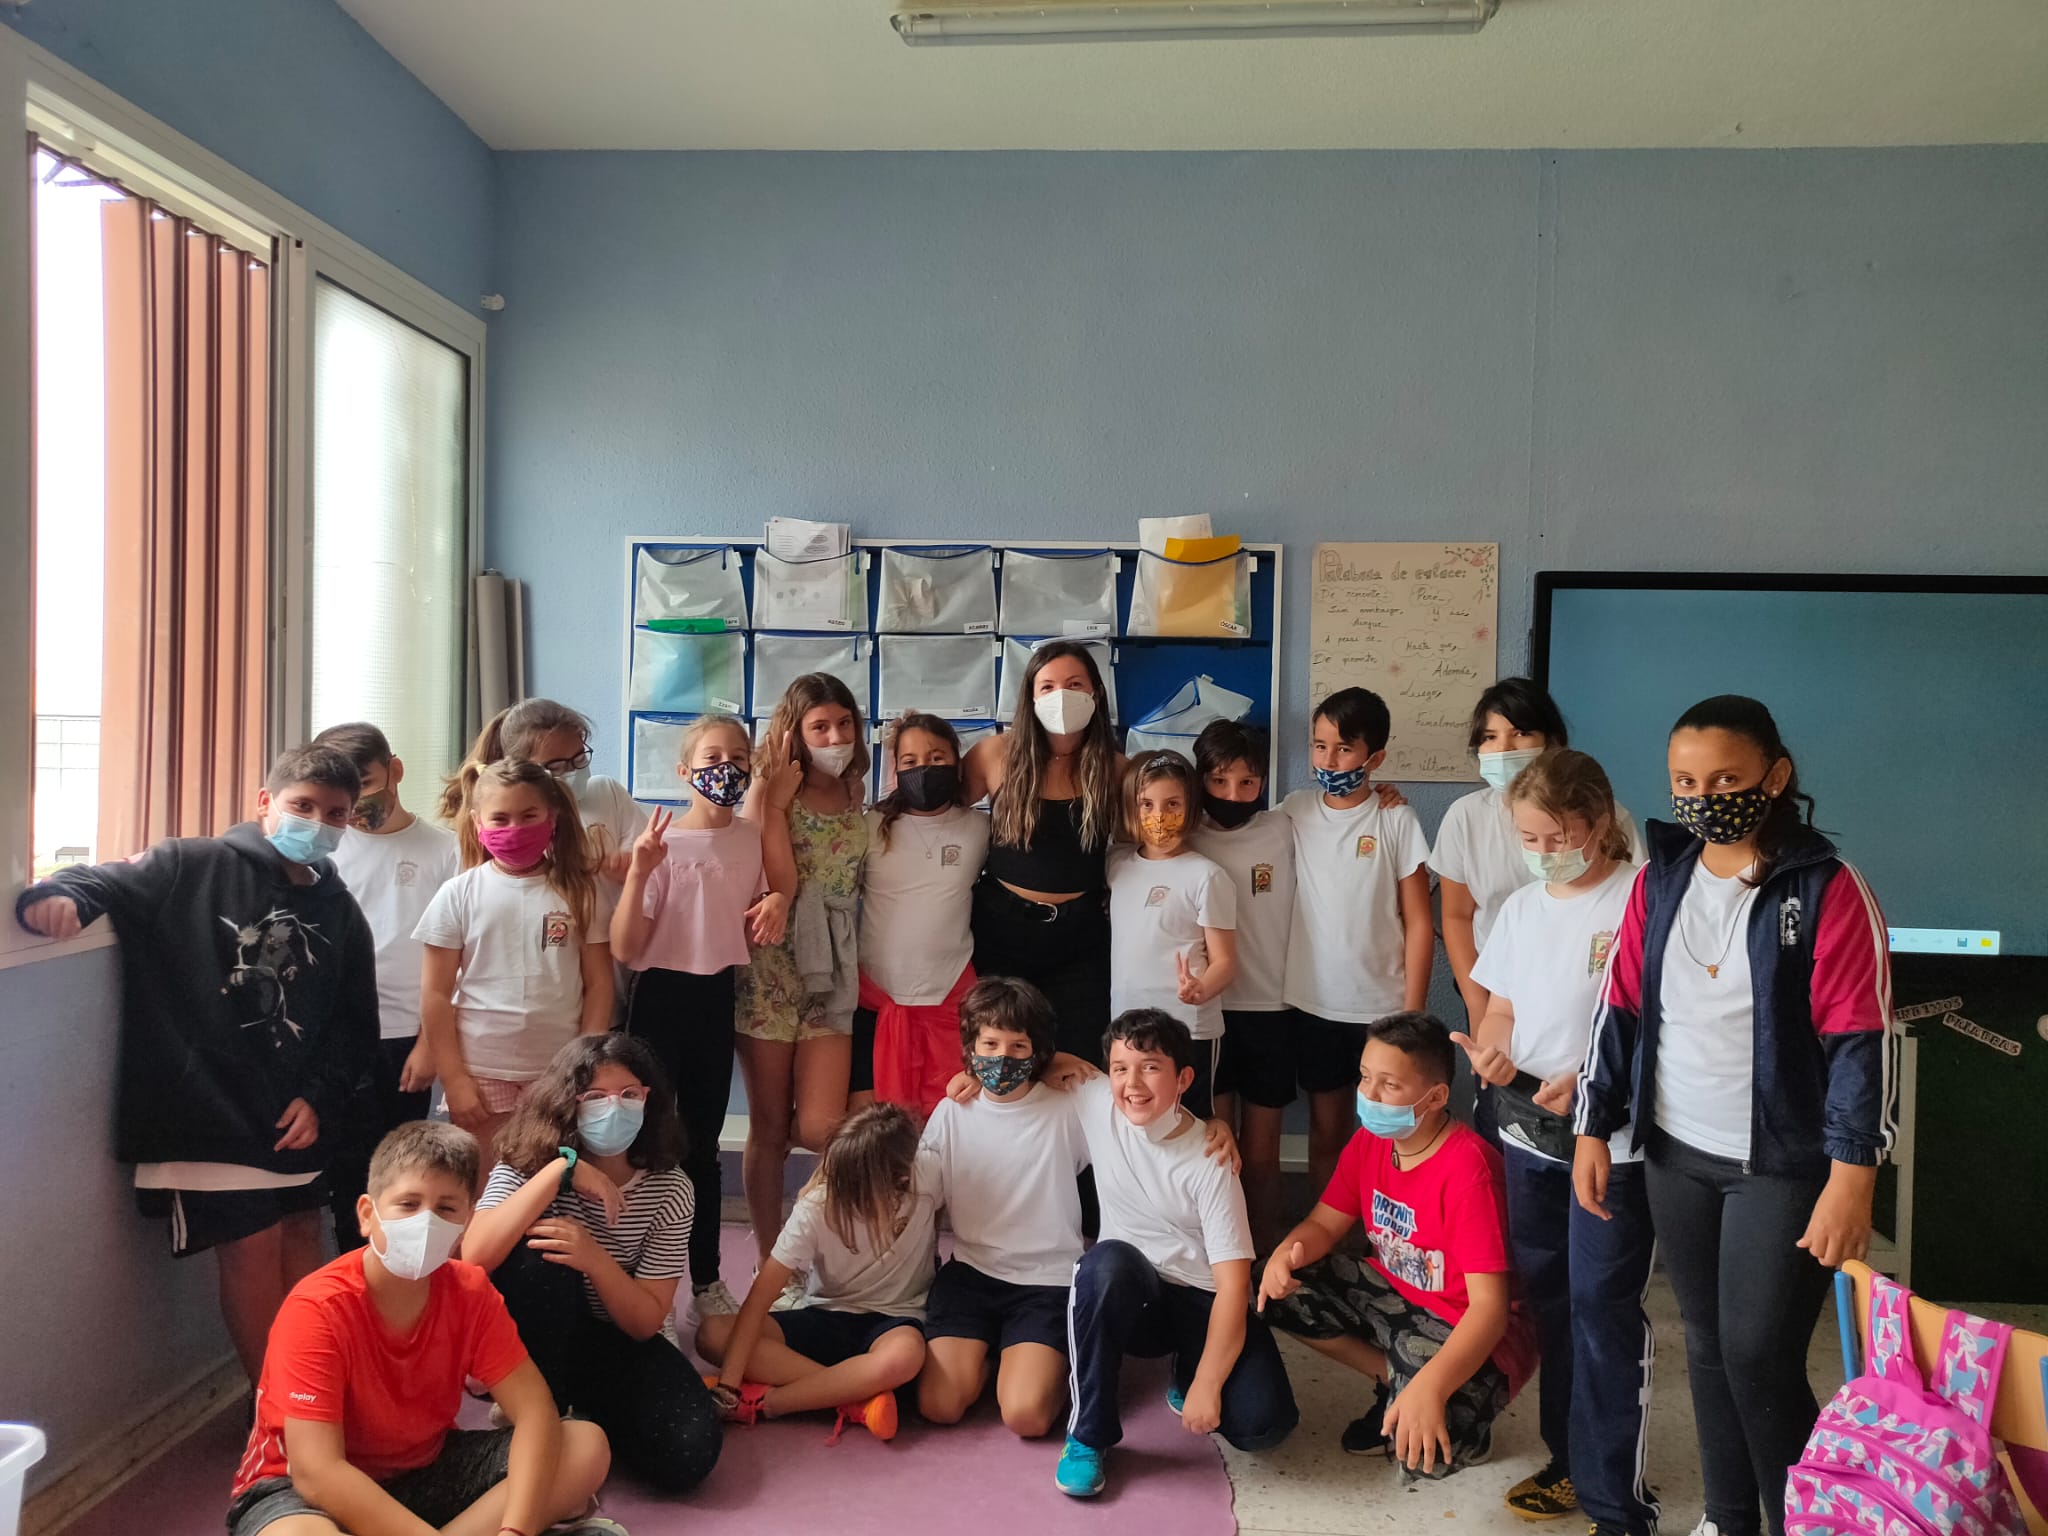 A group of younger students with their teacher in the center. All are wearing masks.